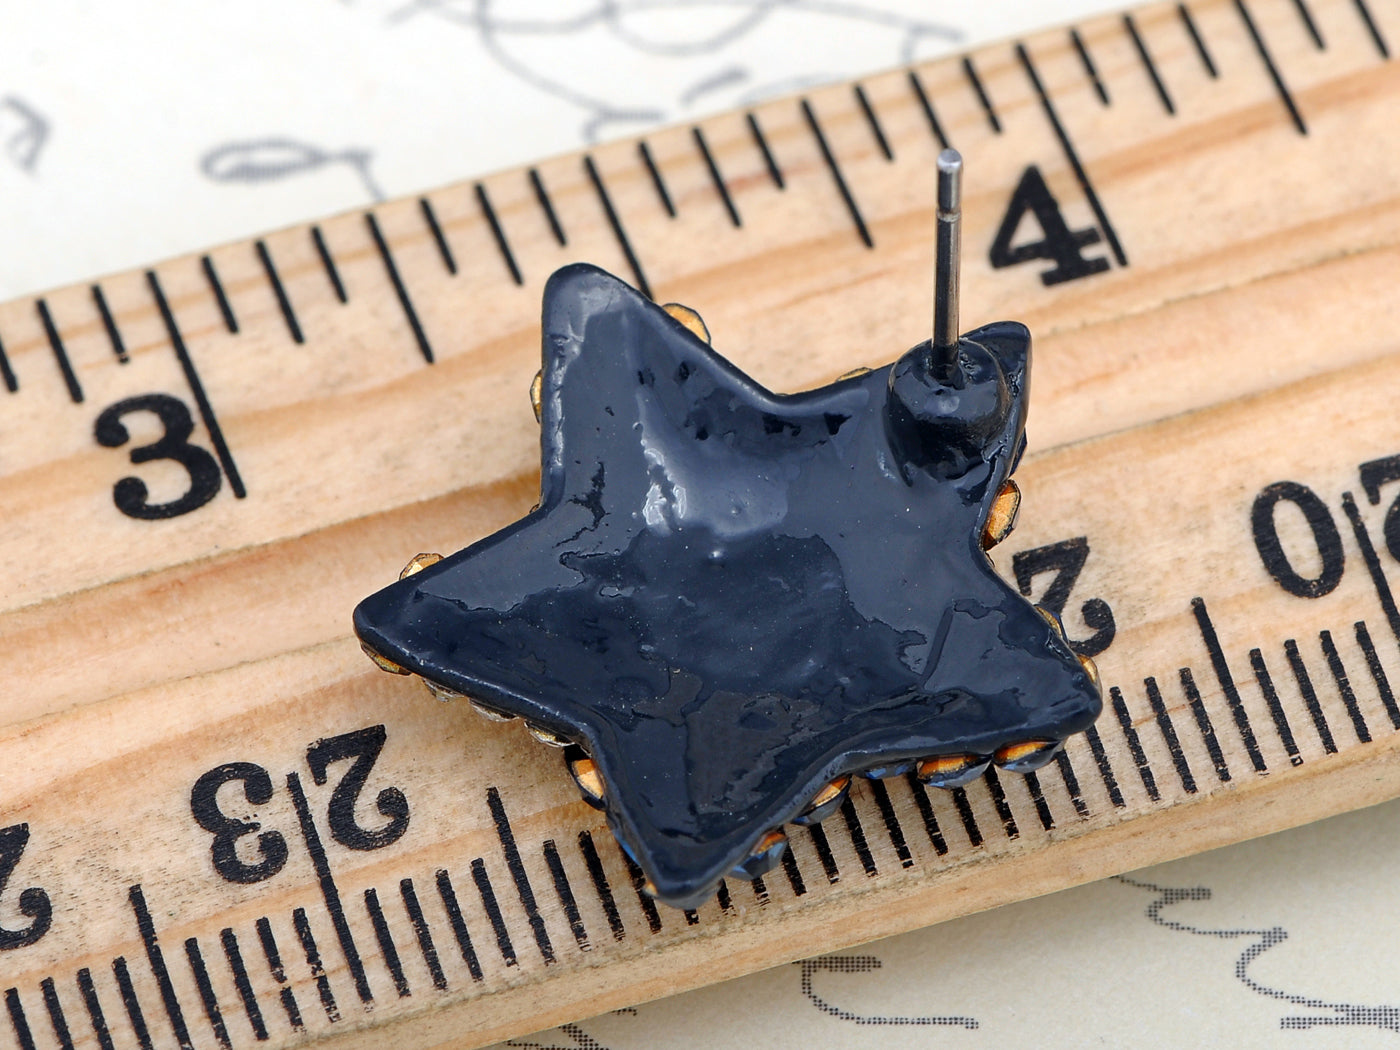 Black Colored Abstract Shape On Star Twinkle Element Earrings